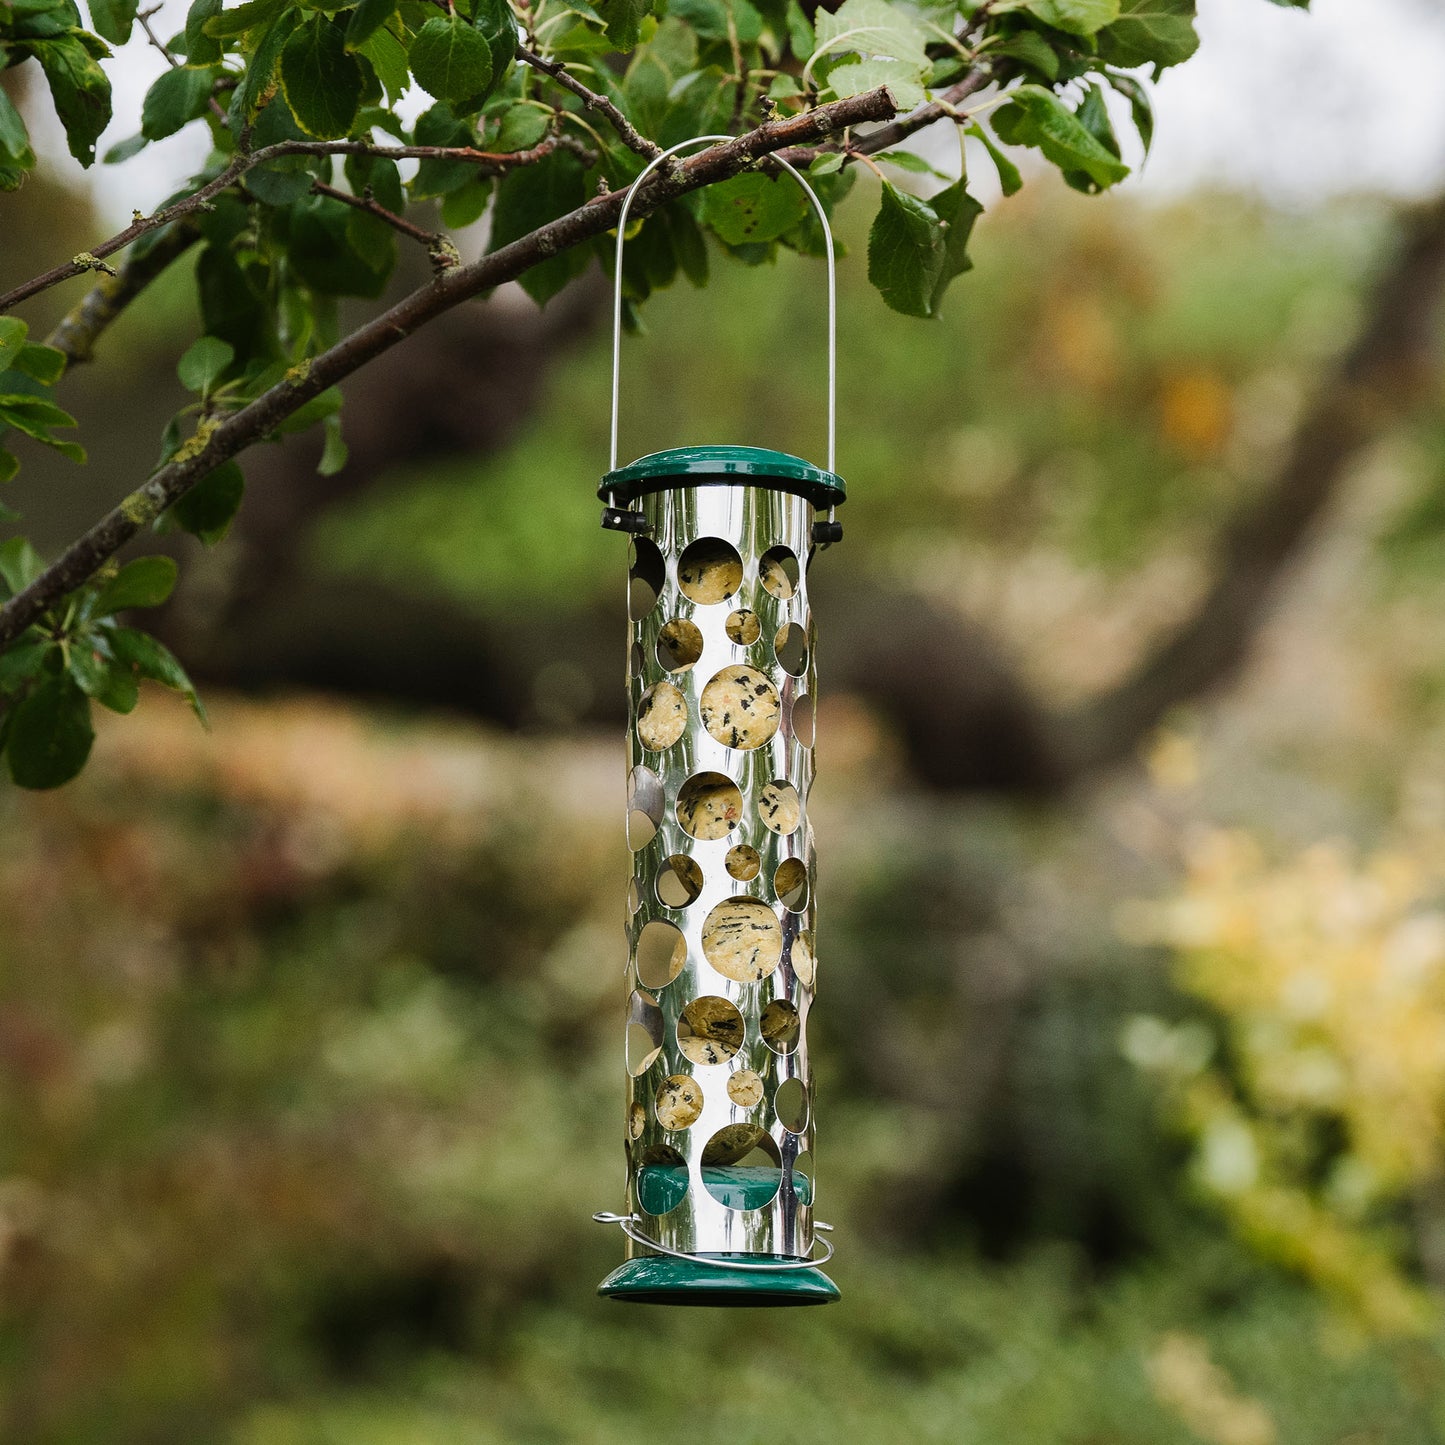 Energy ball feeder hanging from tree